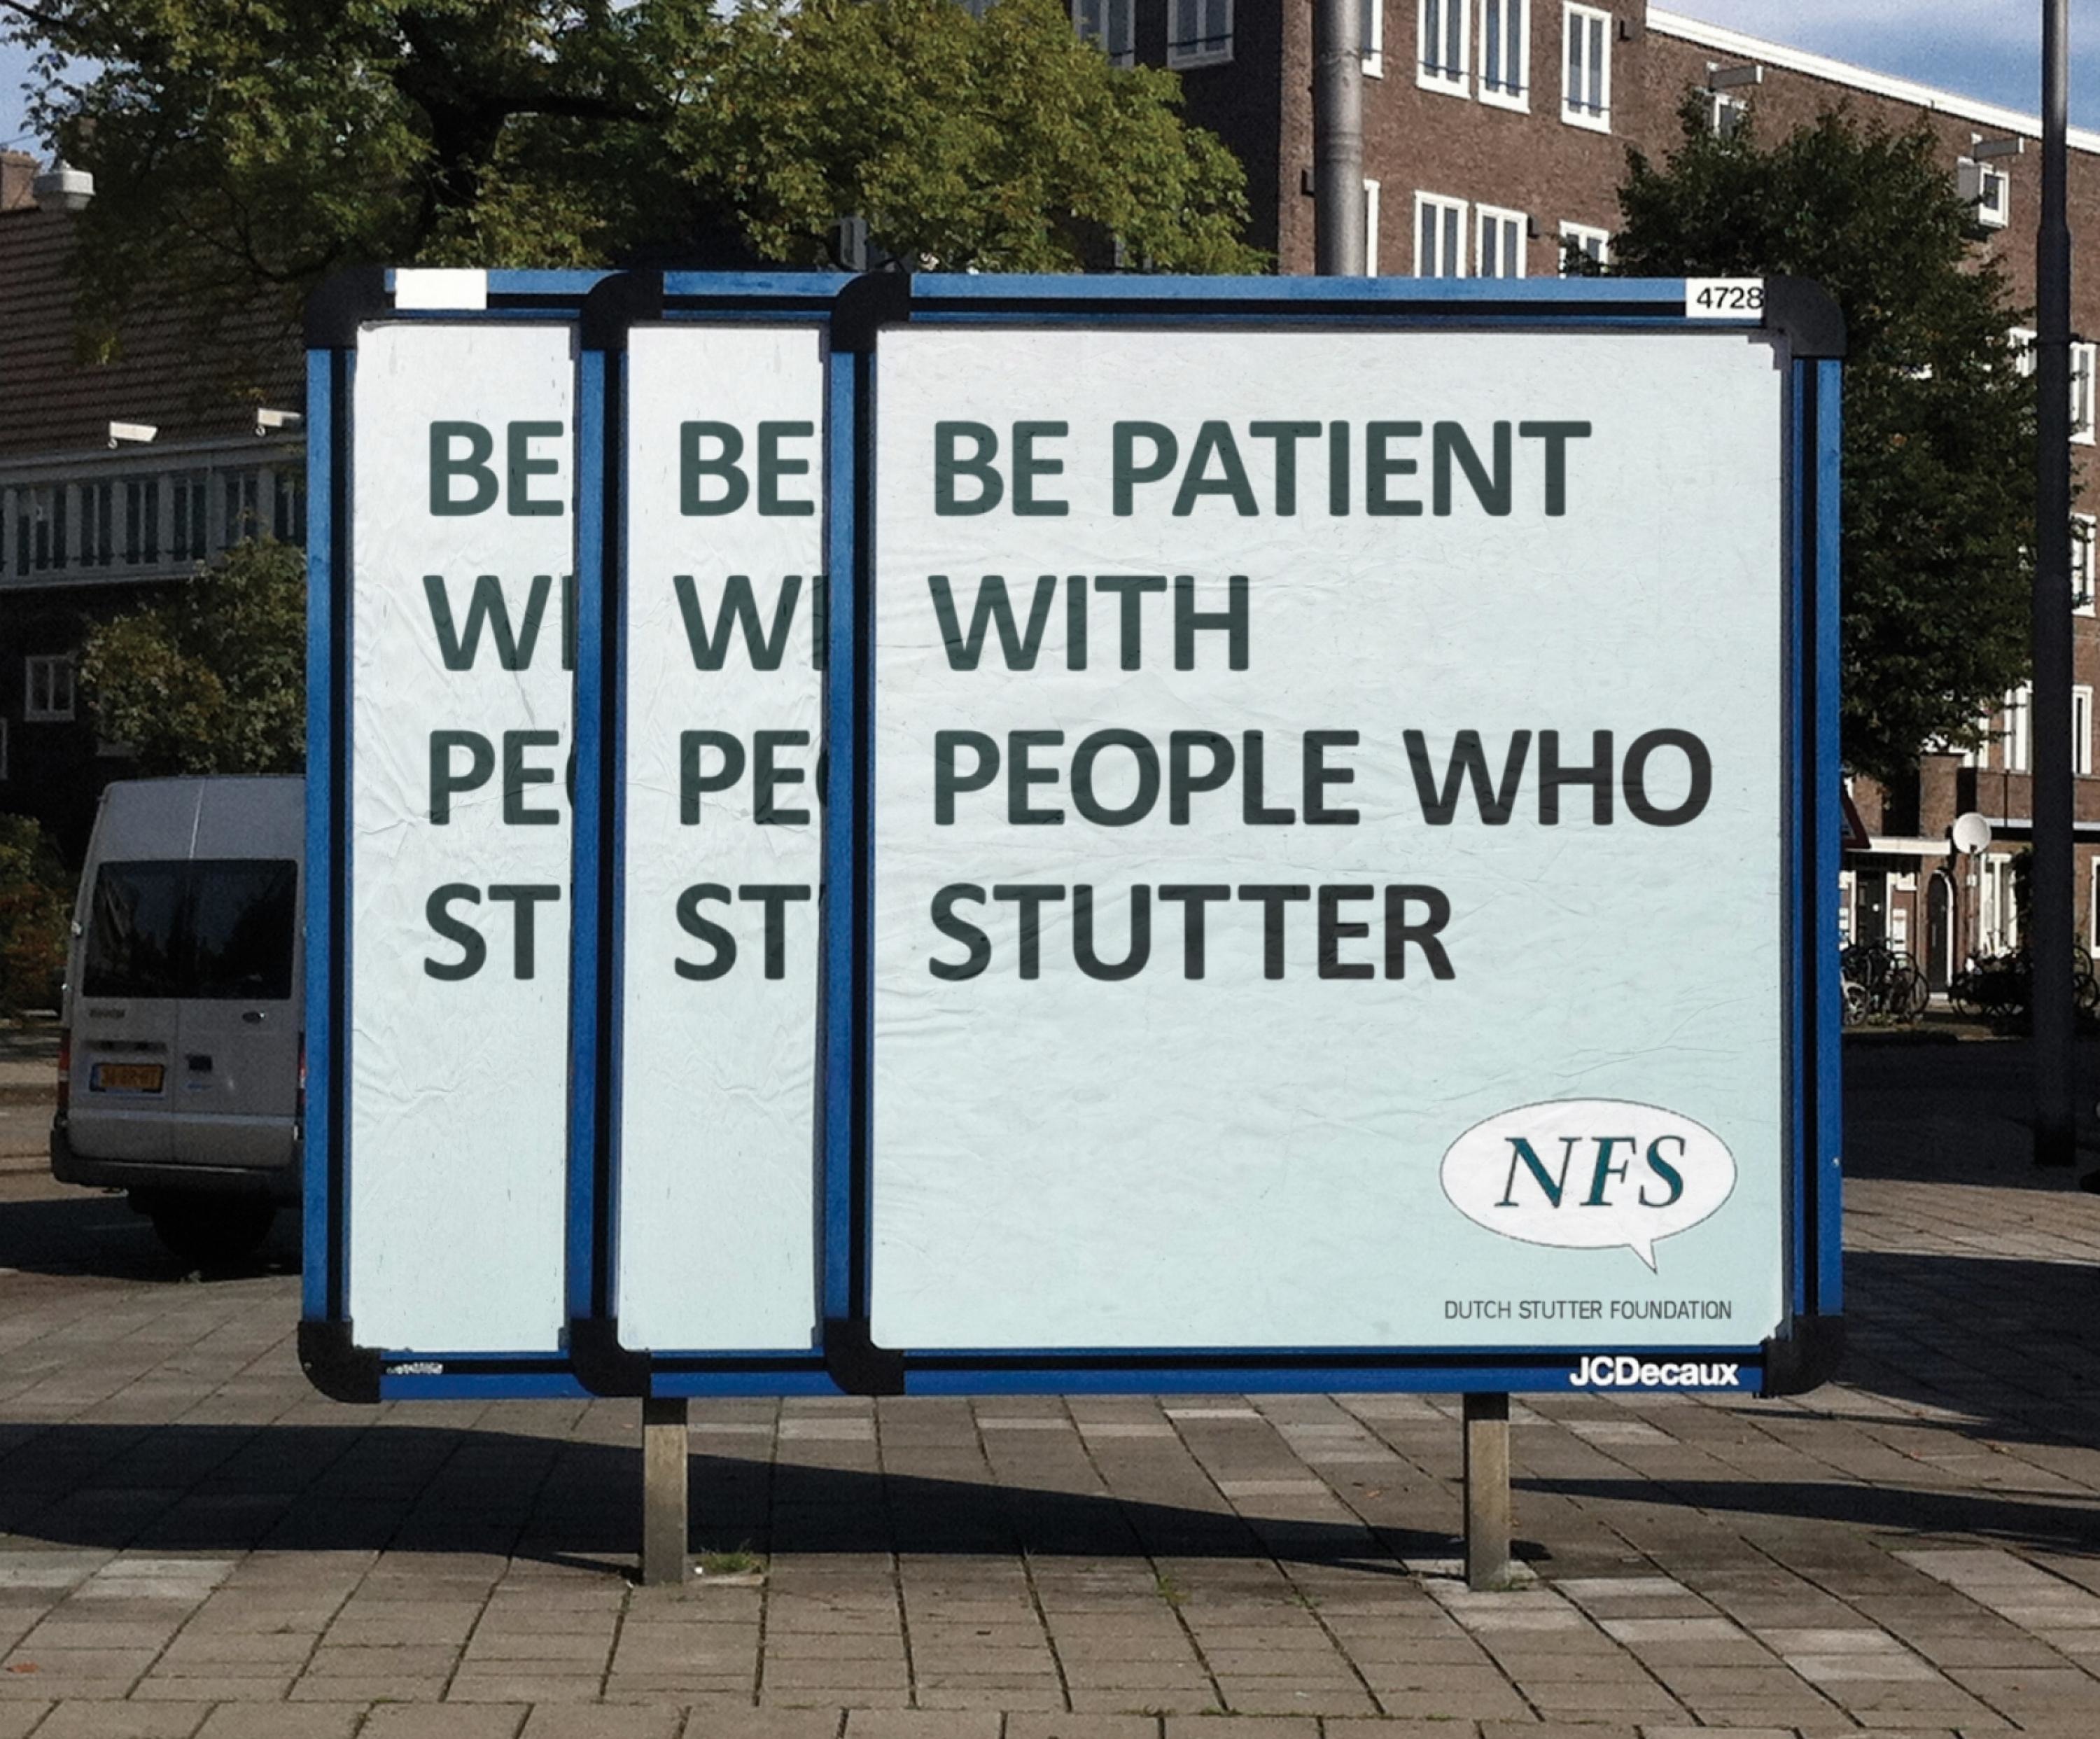 BE PATIENT WITH PEOPLE WHO STUTTER